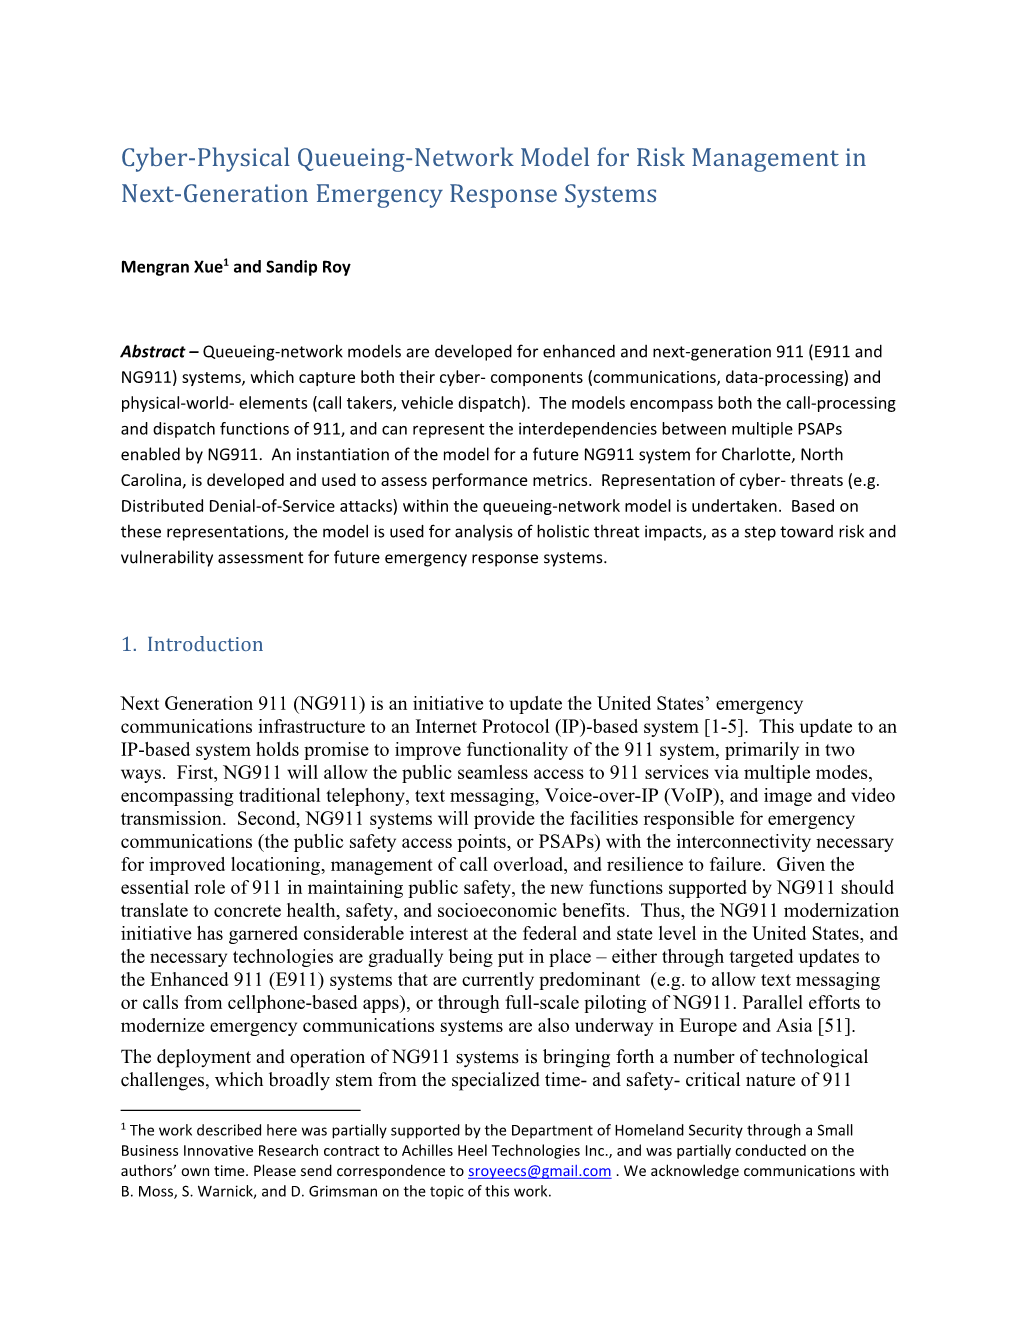 Cyber-Physical Queueing-Network Model for Risk Management in Next-Generation Emergency Response Systems